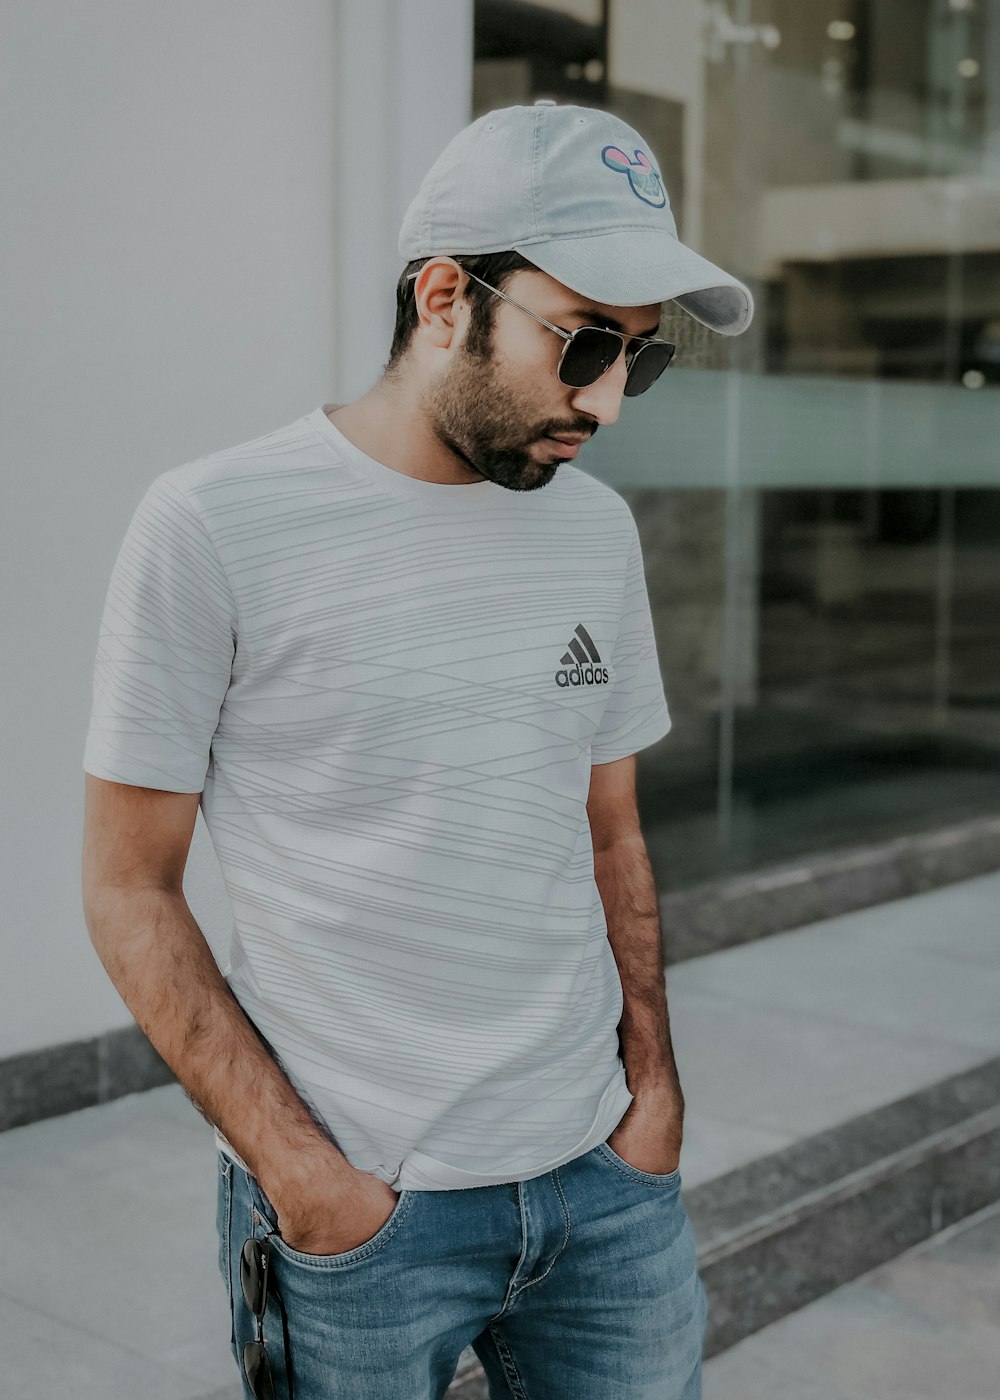 man in white crew neck t-shirt and blue denim jeans wearing white sunglasses